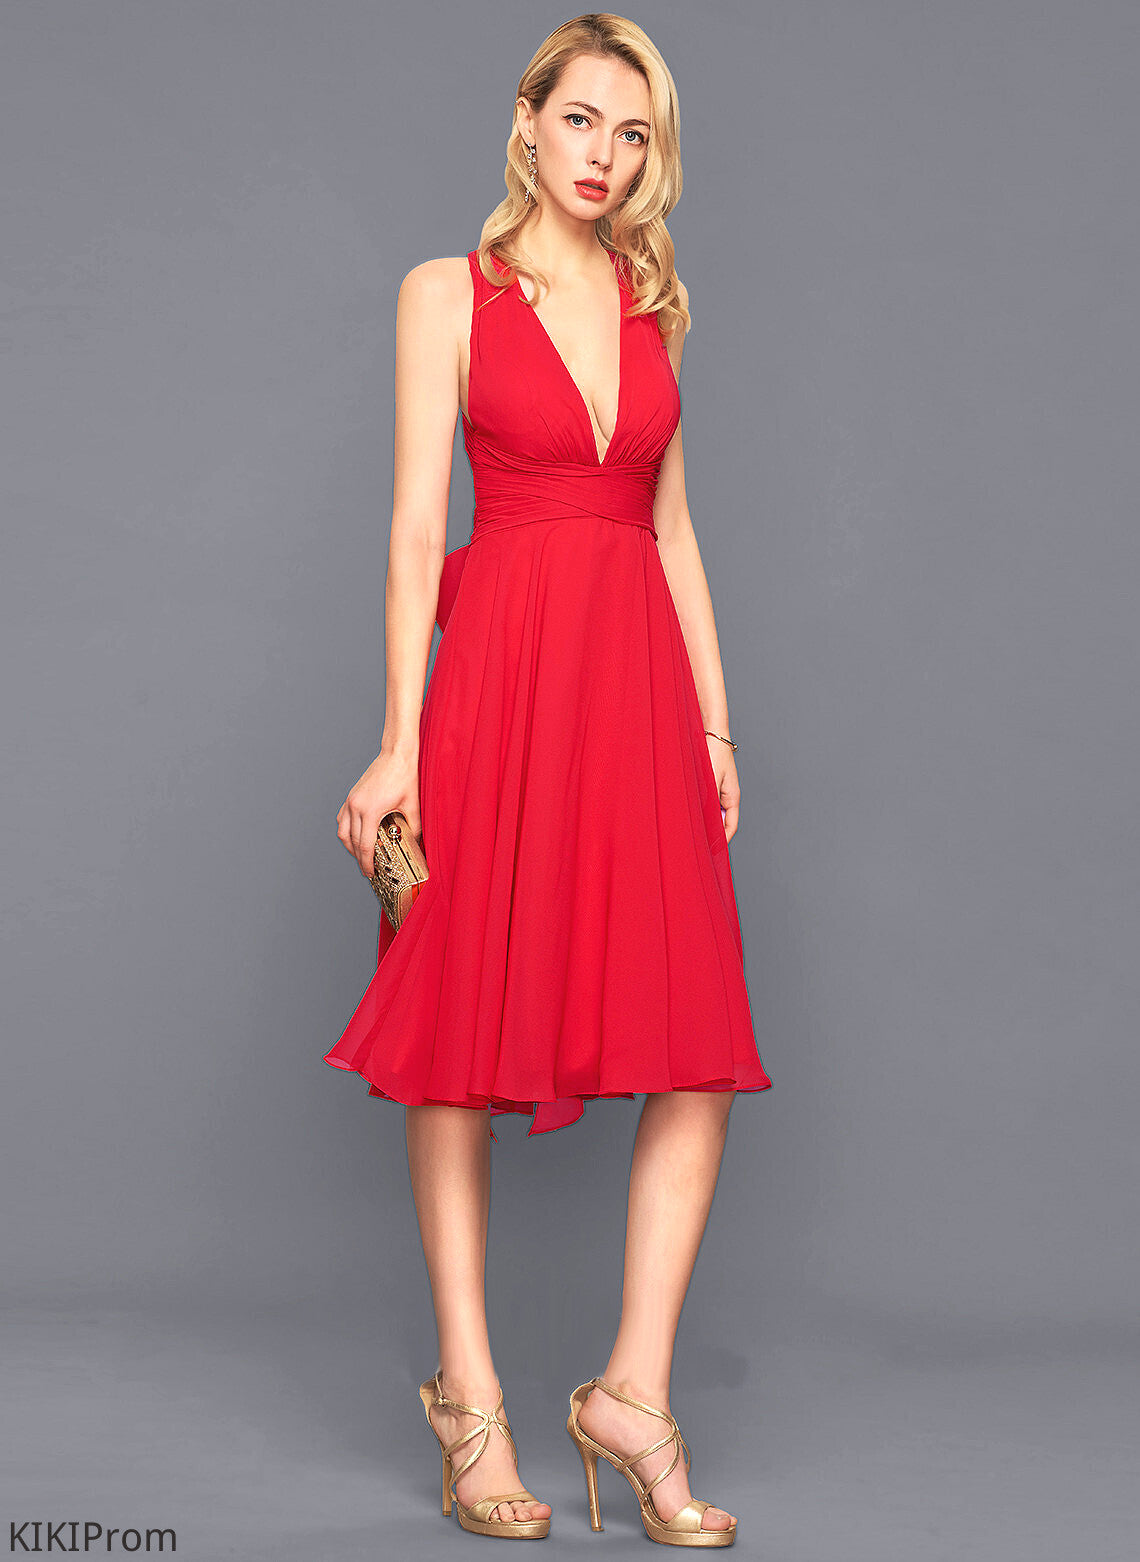 With A-Line Knee-Length Bow(s) Ruffle V-neck Cocktail Chiffon Dress Kirsten Cocktail Dresses